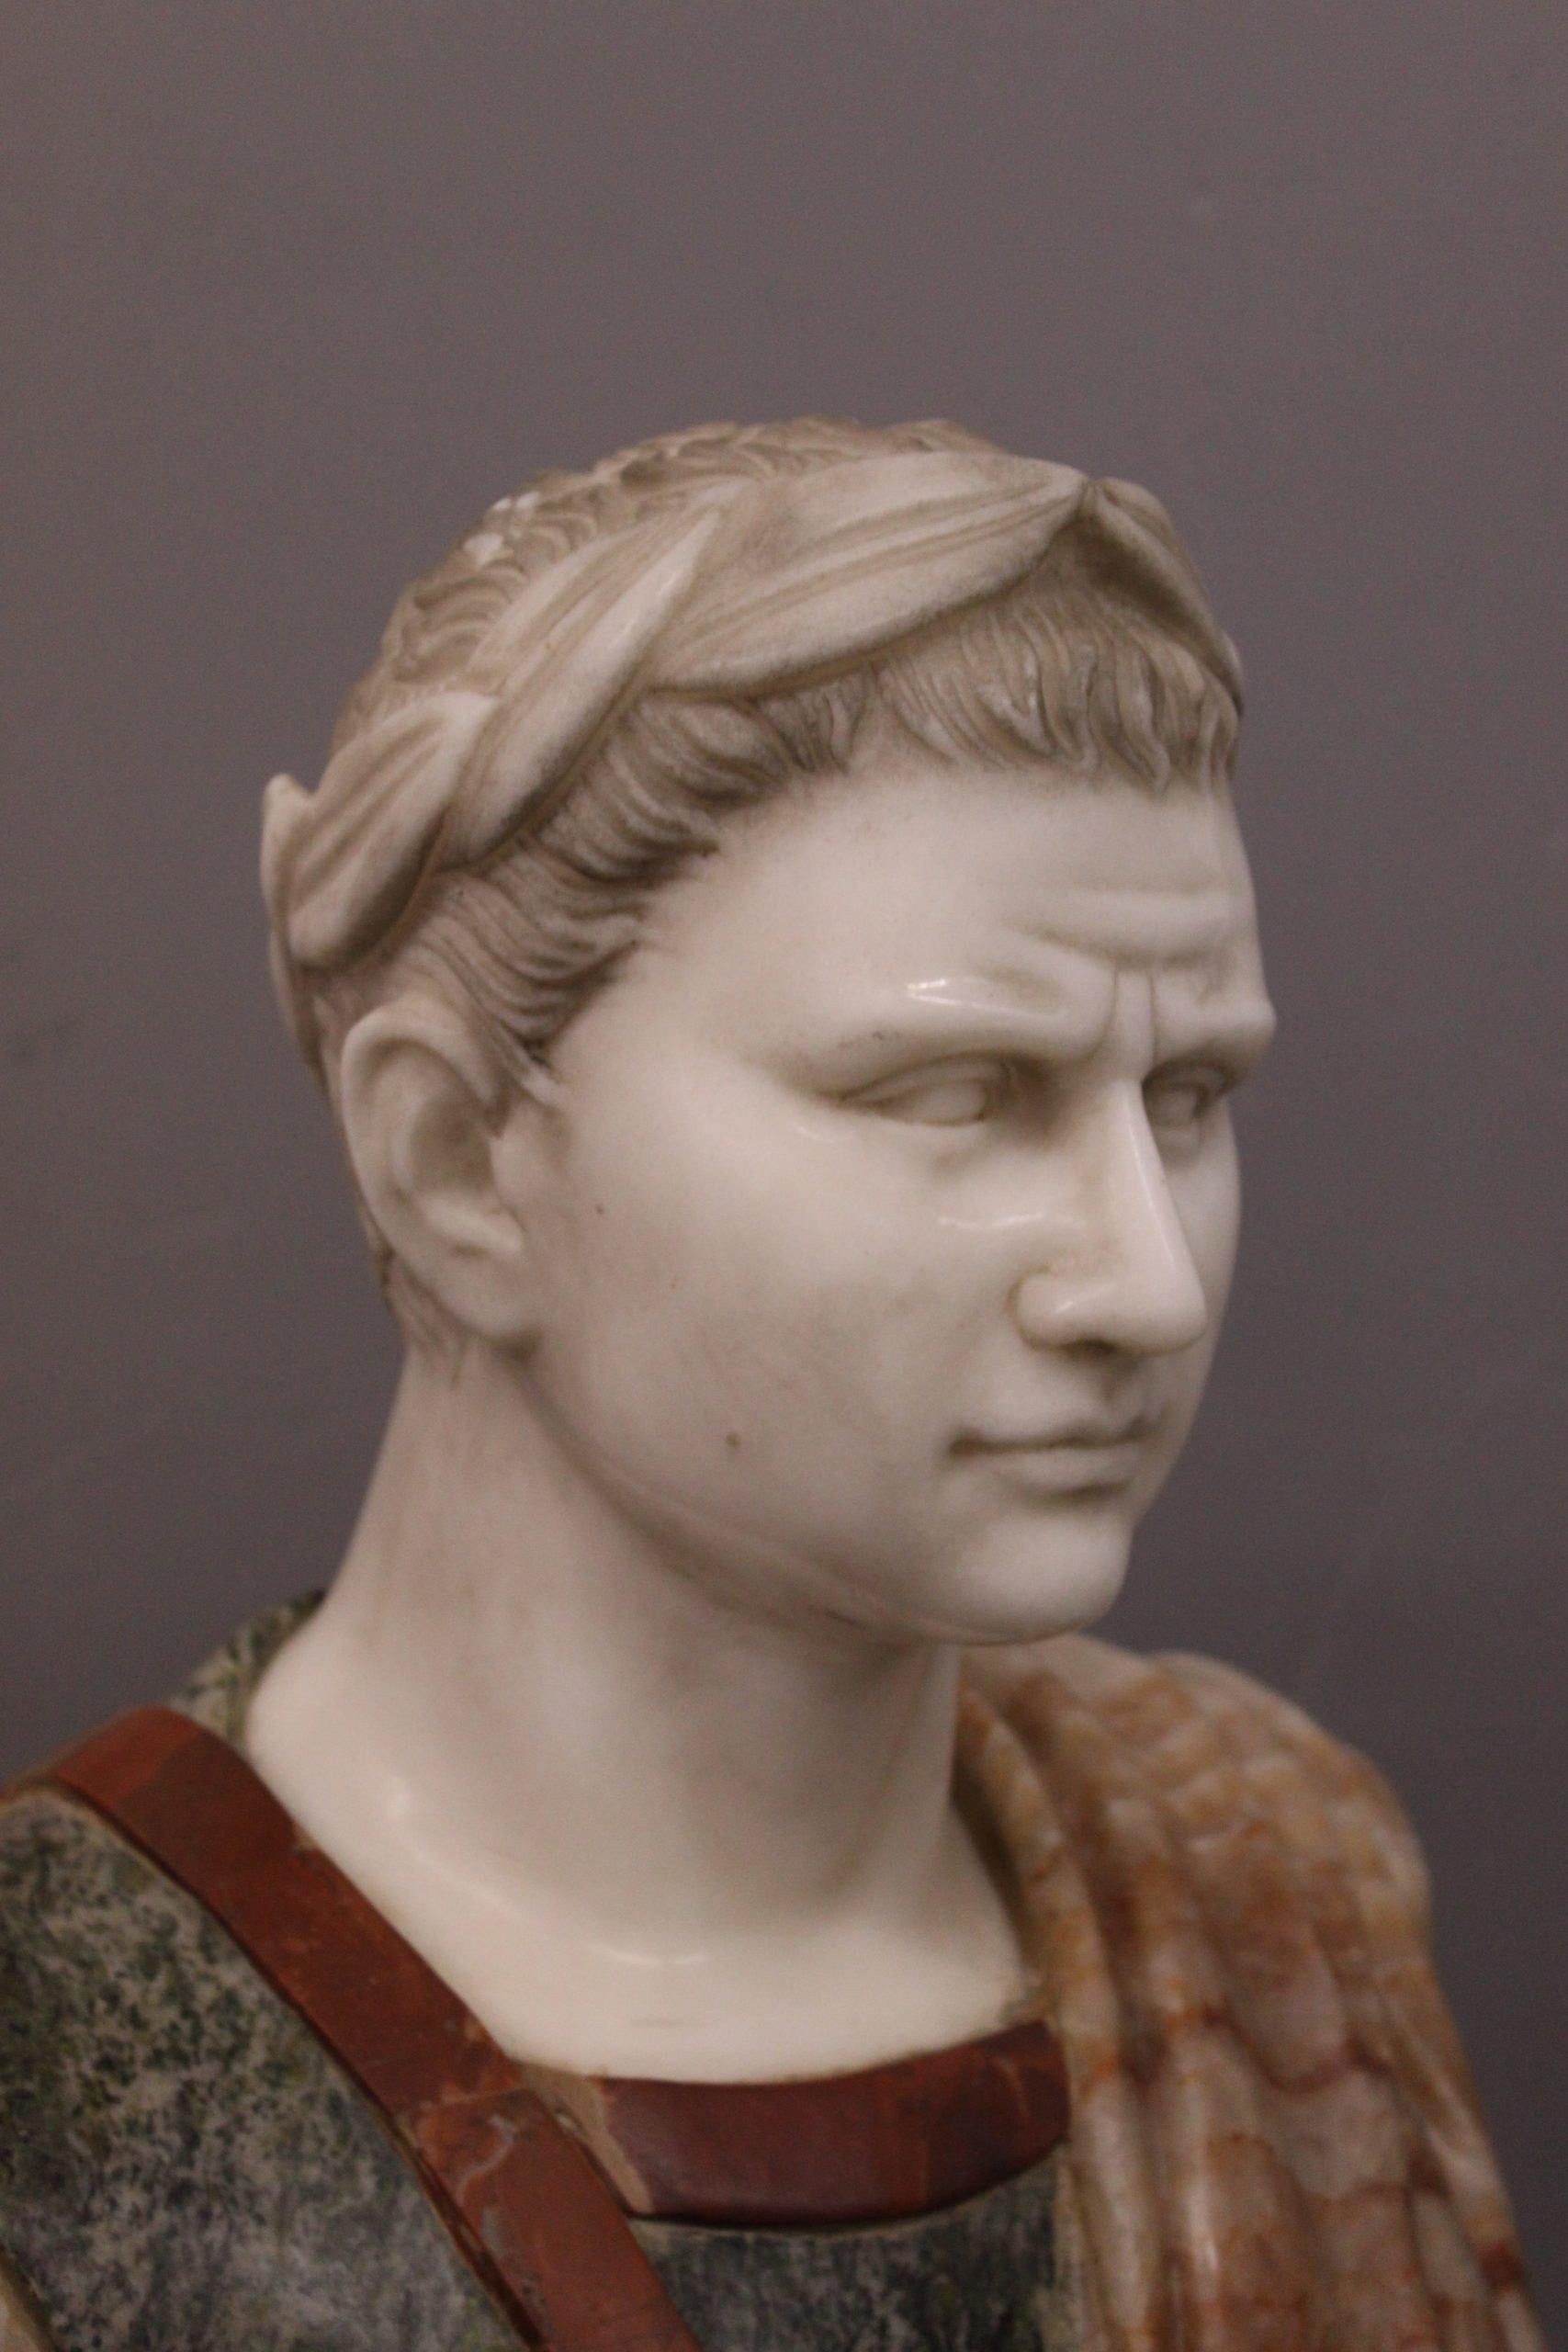 Marble bust of Emperor Caesar h 55 cm. marble sculpture. ADDITIONAL PHOTOS AND INFORMATION CAN BE REQUESTED BY EMAIL. Indicative shipping costs in Italy: 120€ and Europe: 160€. WE SHIP WORLDWIDE, WRITE US AN EMAIL FOR A PRECISE ESTIMATE OF THE